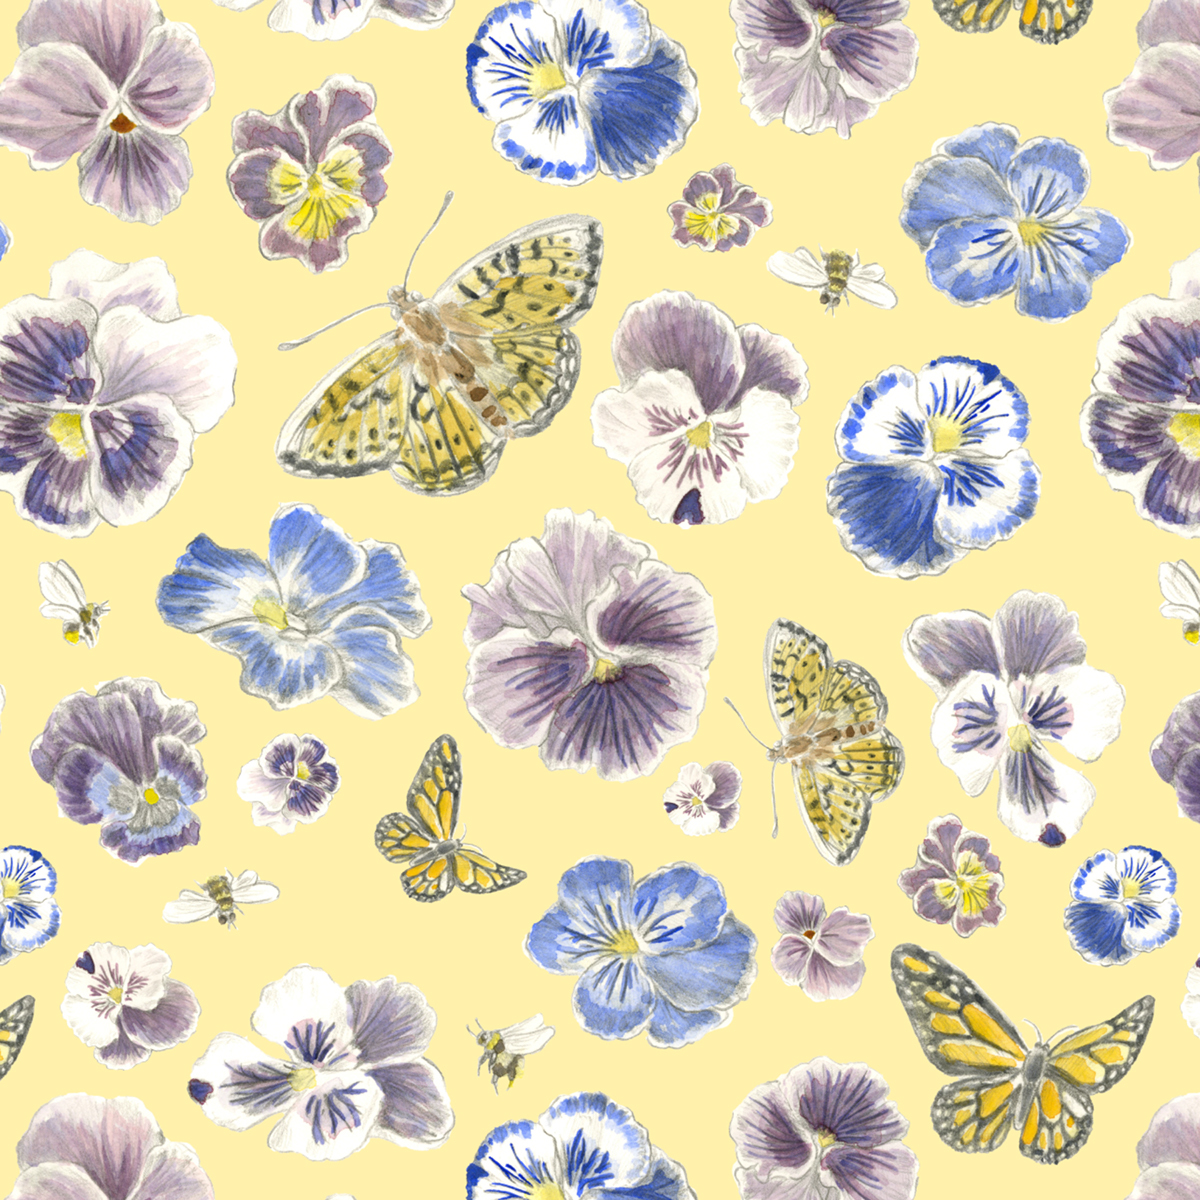 floral butterfly ILLUSTRATION  watercolor graphite vintage pansy fabric design pattern surface design